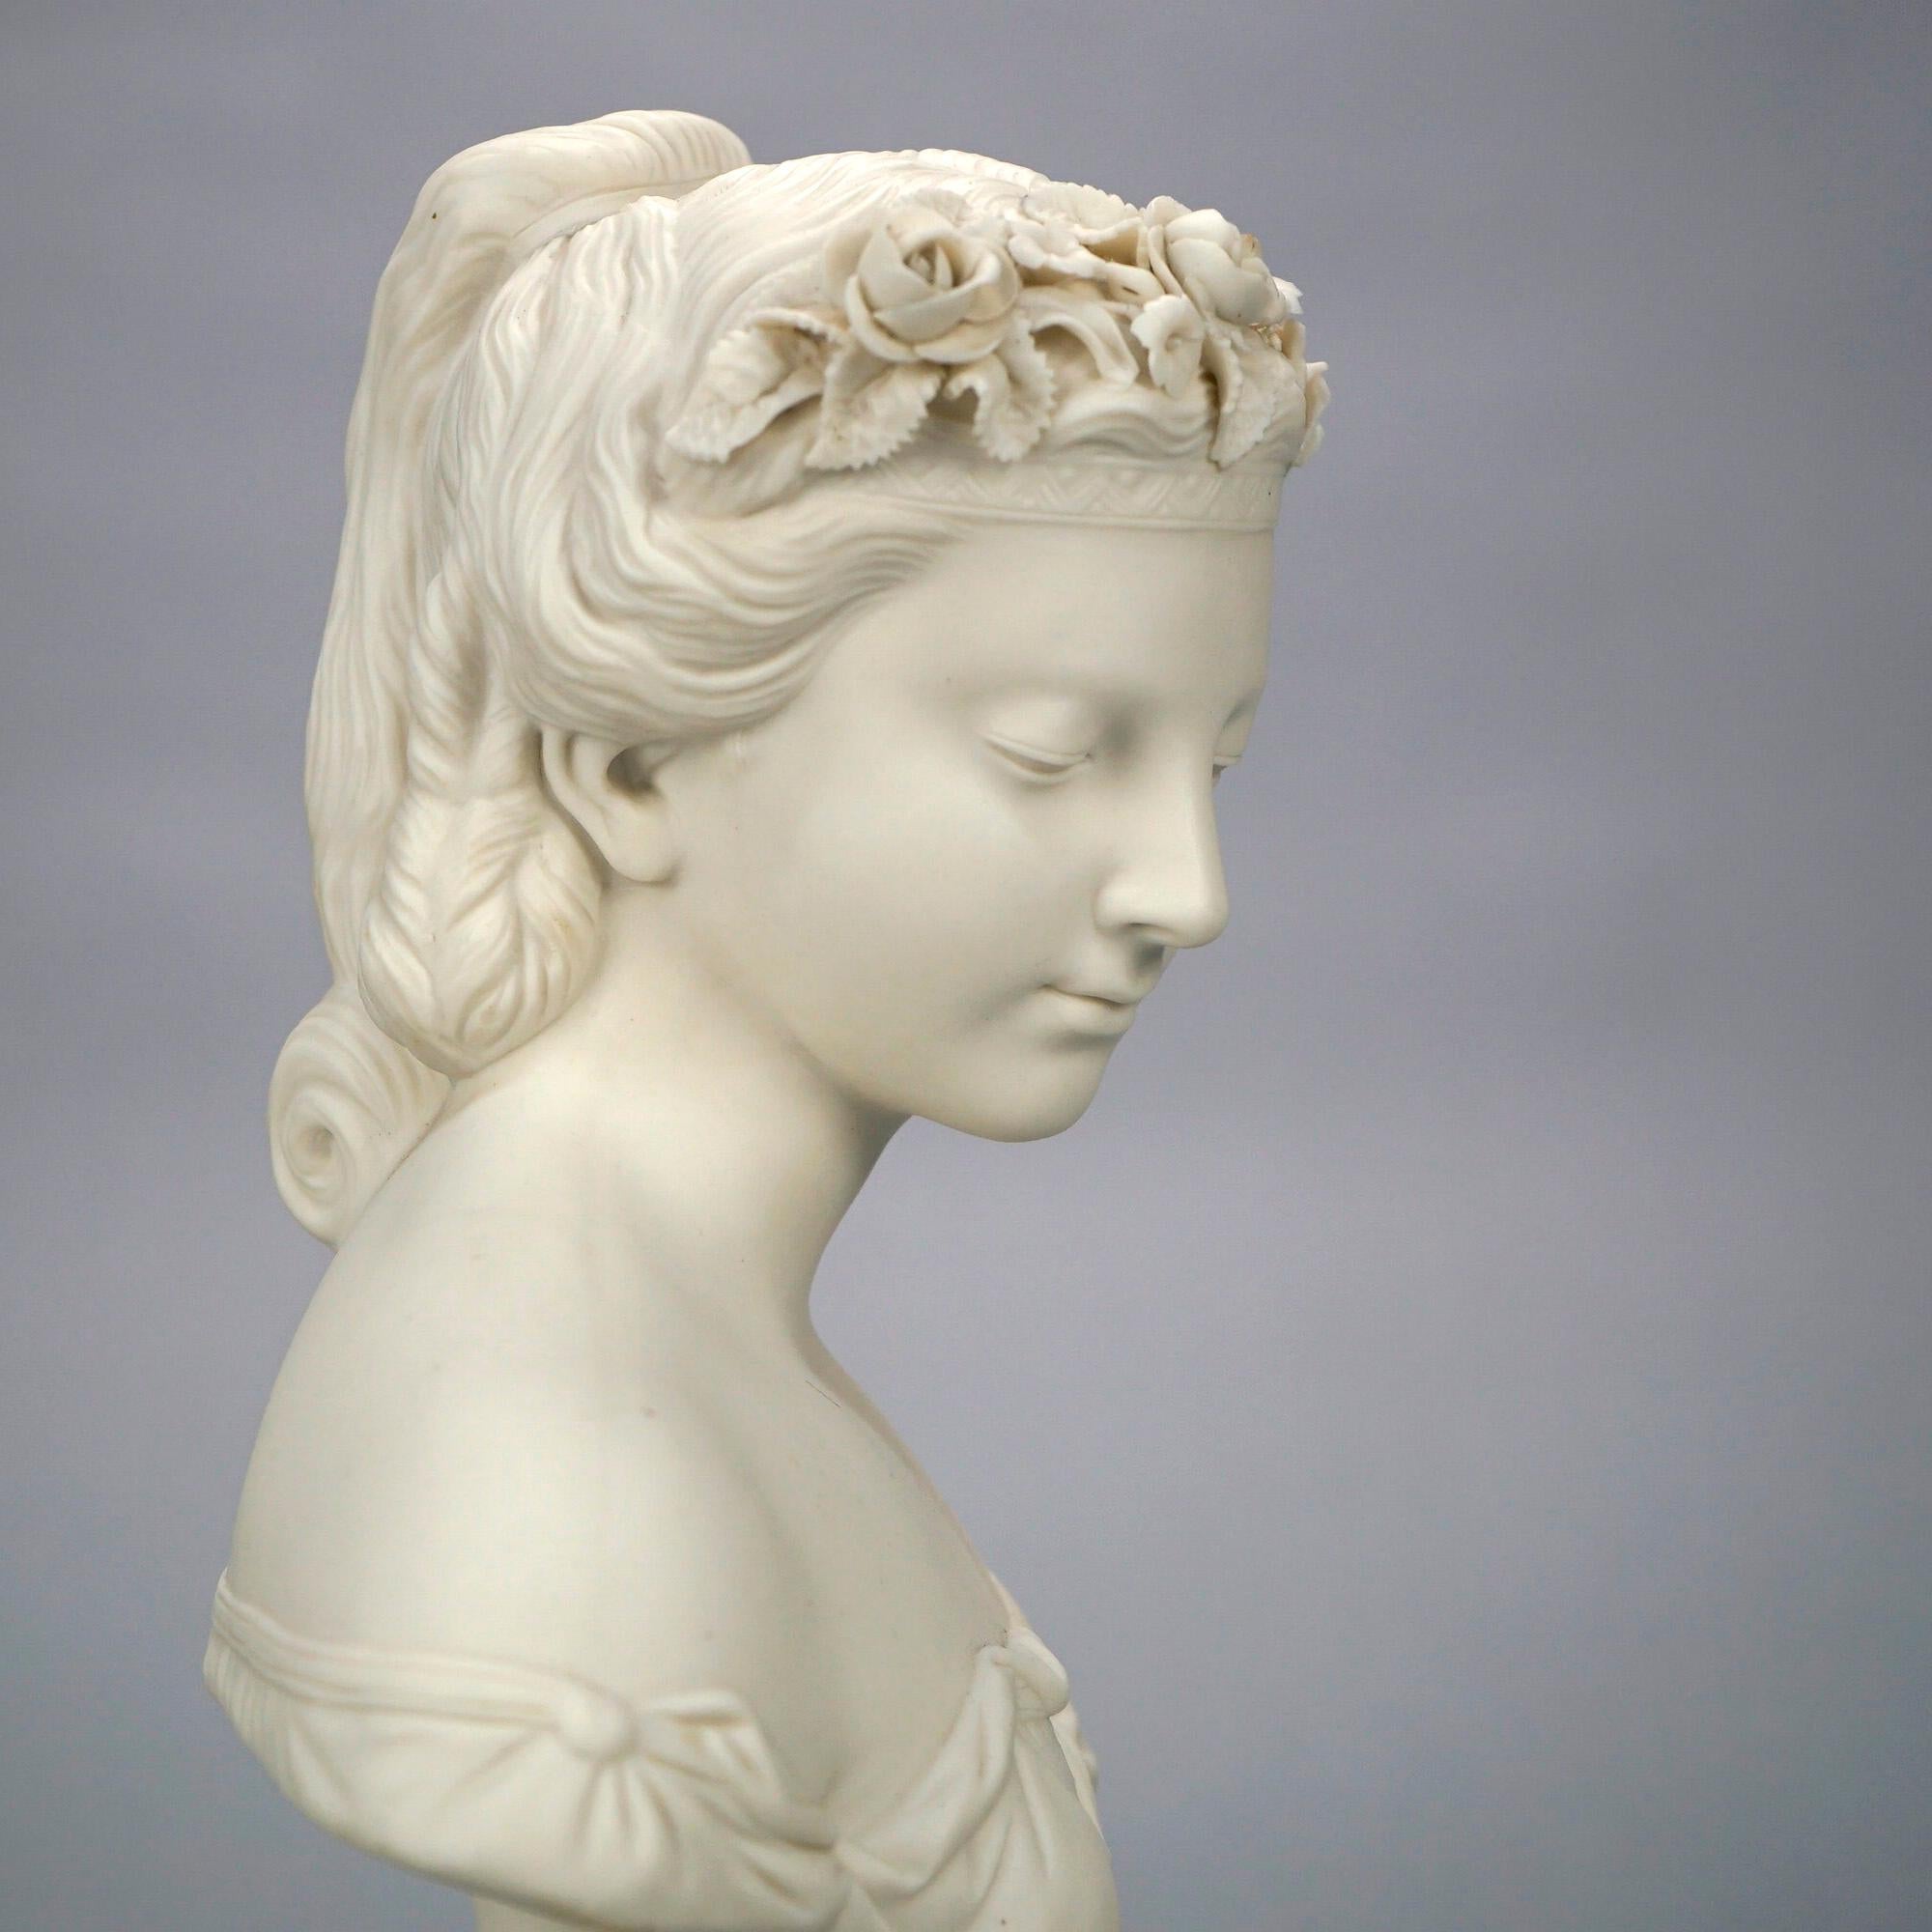 An antique parian porcelain sculpture offers bust of a Classical young woman with floral headpiece, 19th century

Measures- 11.5''H x 7''W x 4.5''D